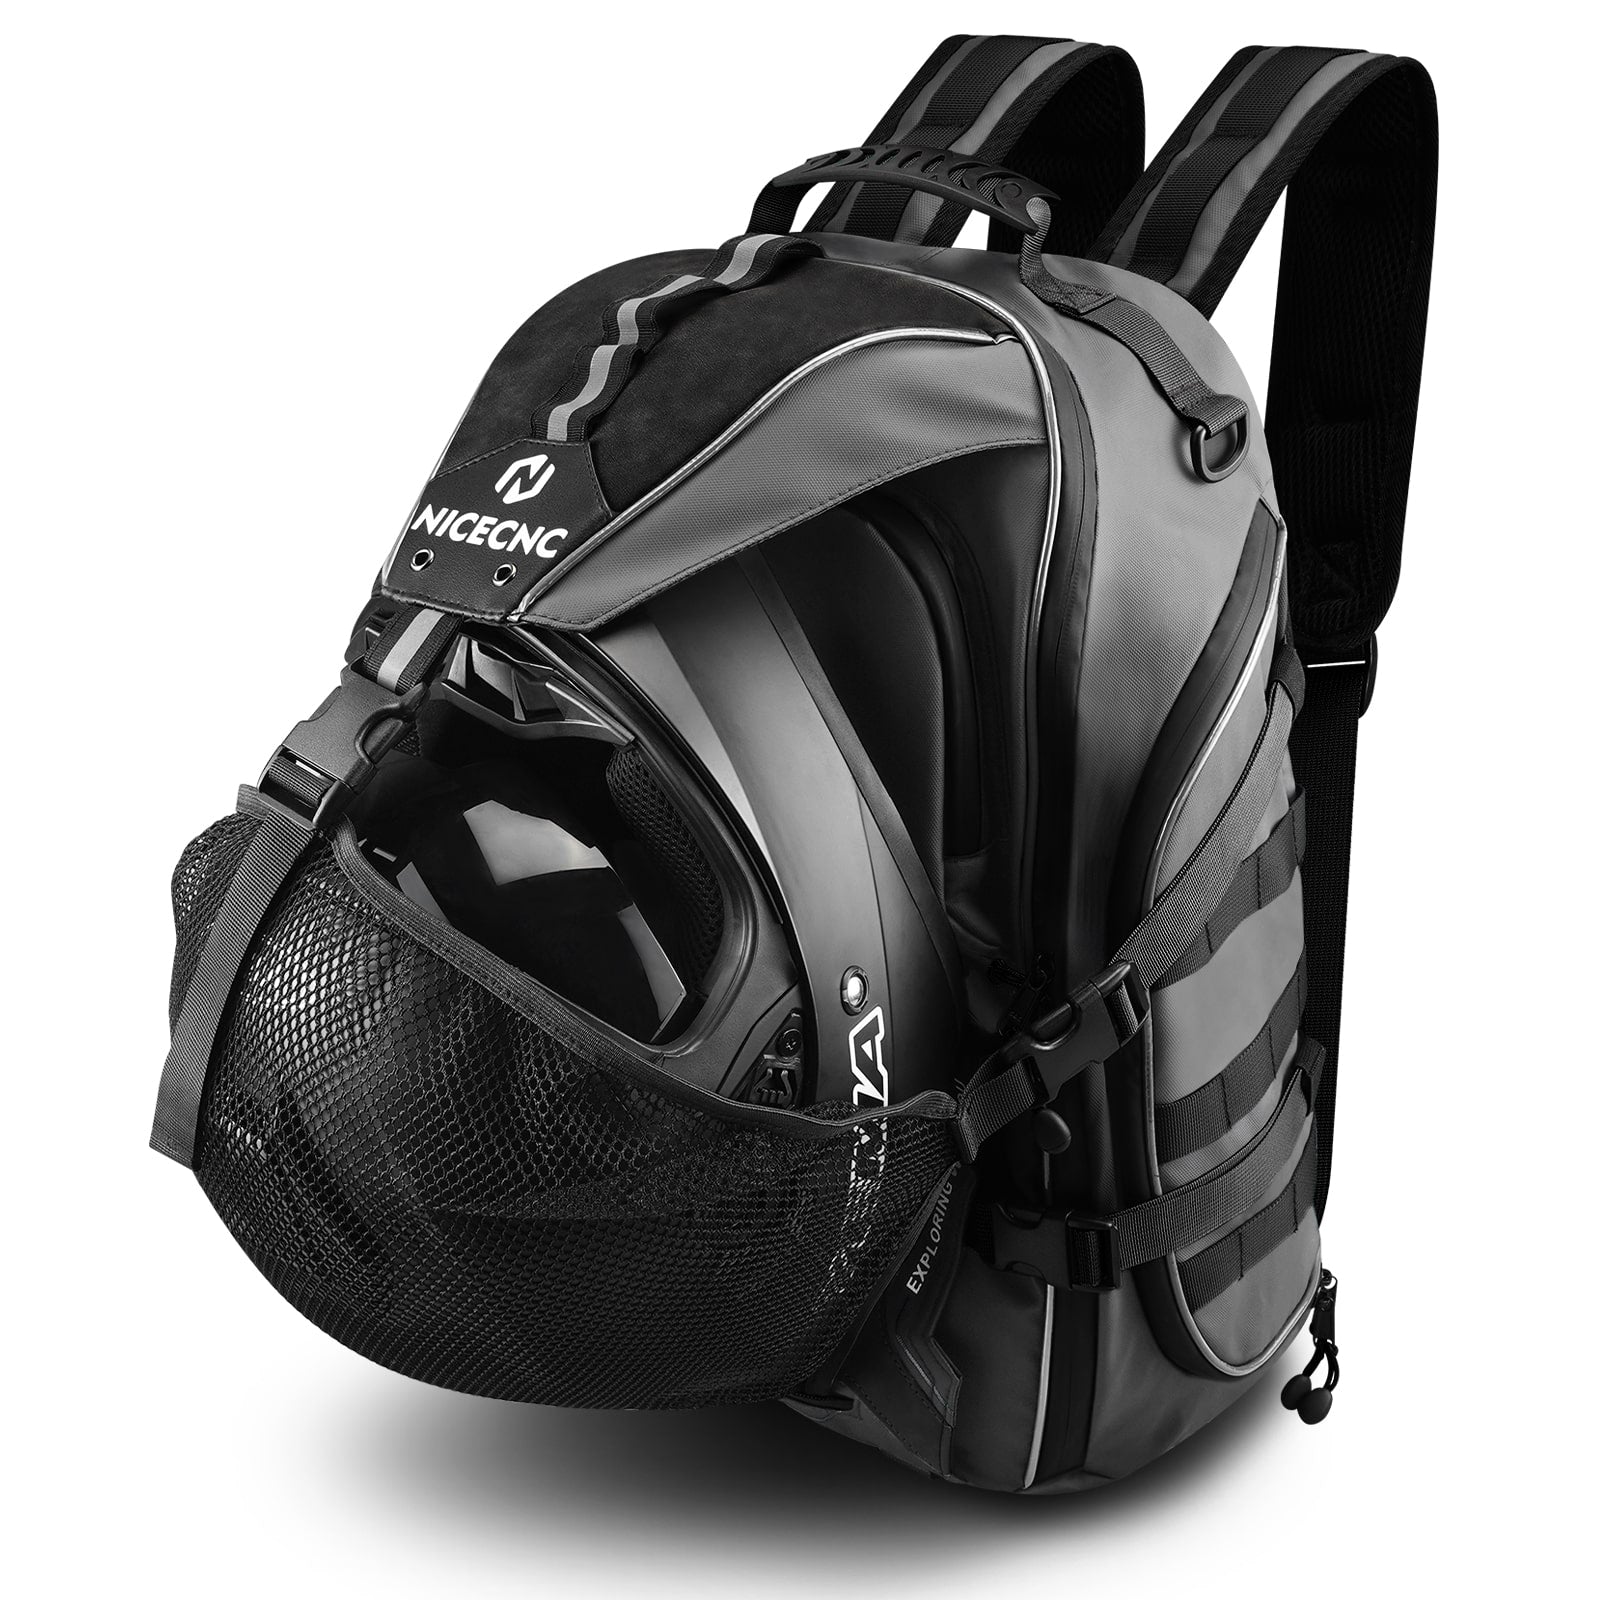 Motorcycle Helmet Bag Upgrade 35L with Shoe Compartment Hiking